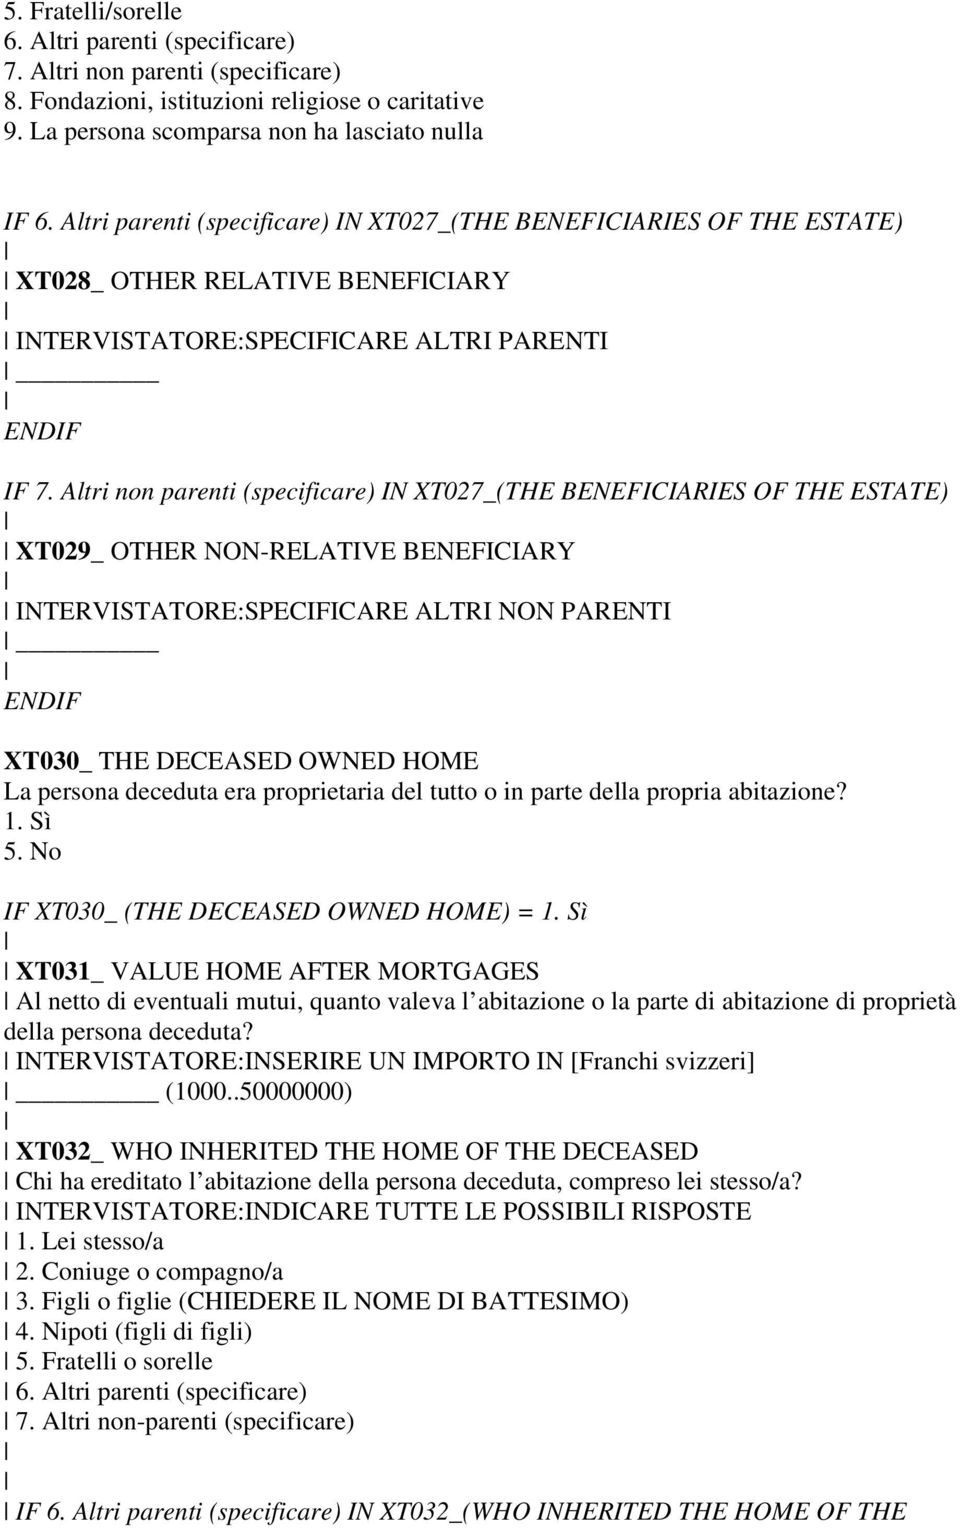 Altri non parenti (specificare) IN XT027_(THE BENEFICIARIES OF THE ESTATE) XT029_ OTHER NON-RELATIVE BENEFICIARY INTERVISTATORE:SPECIFICARE ALTRI NON PARENTI XT030_ THE DECEASED OWNED HOME La persona